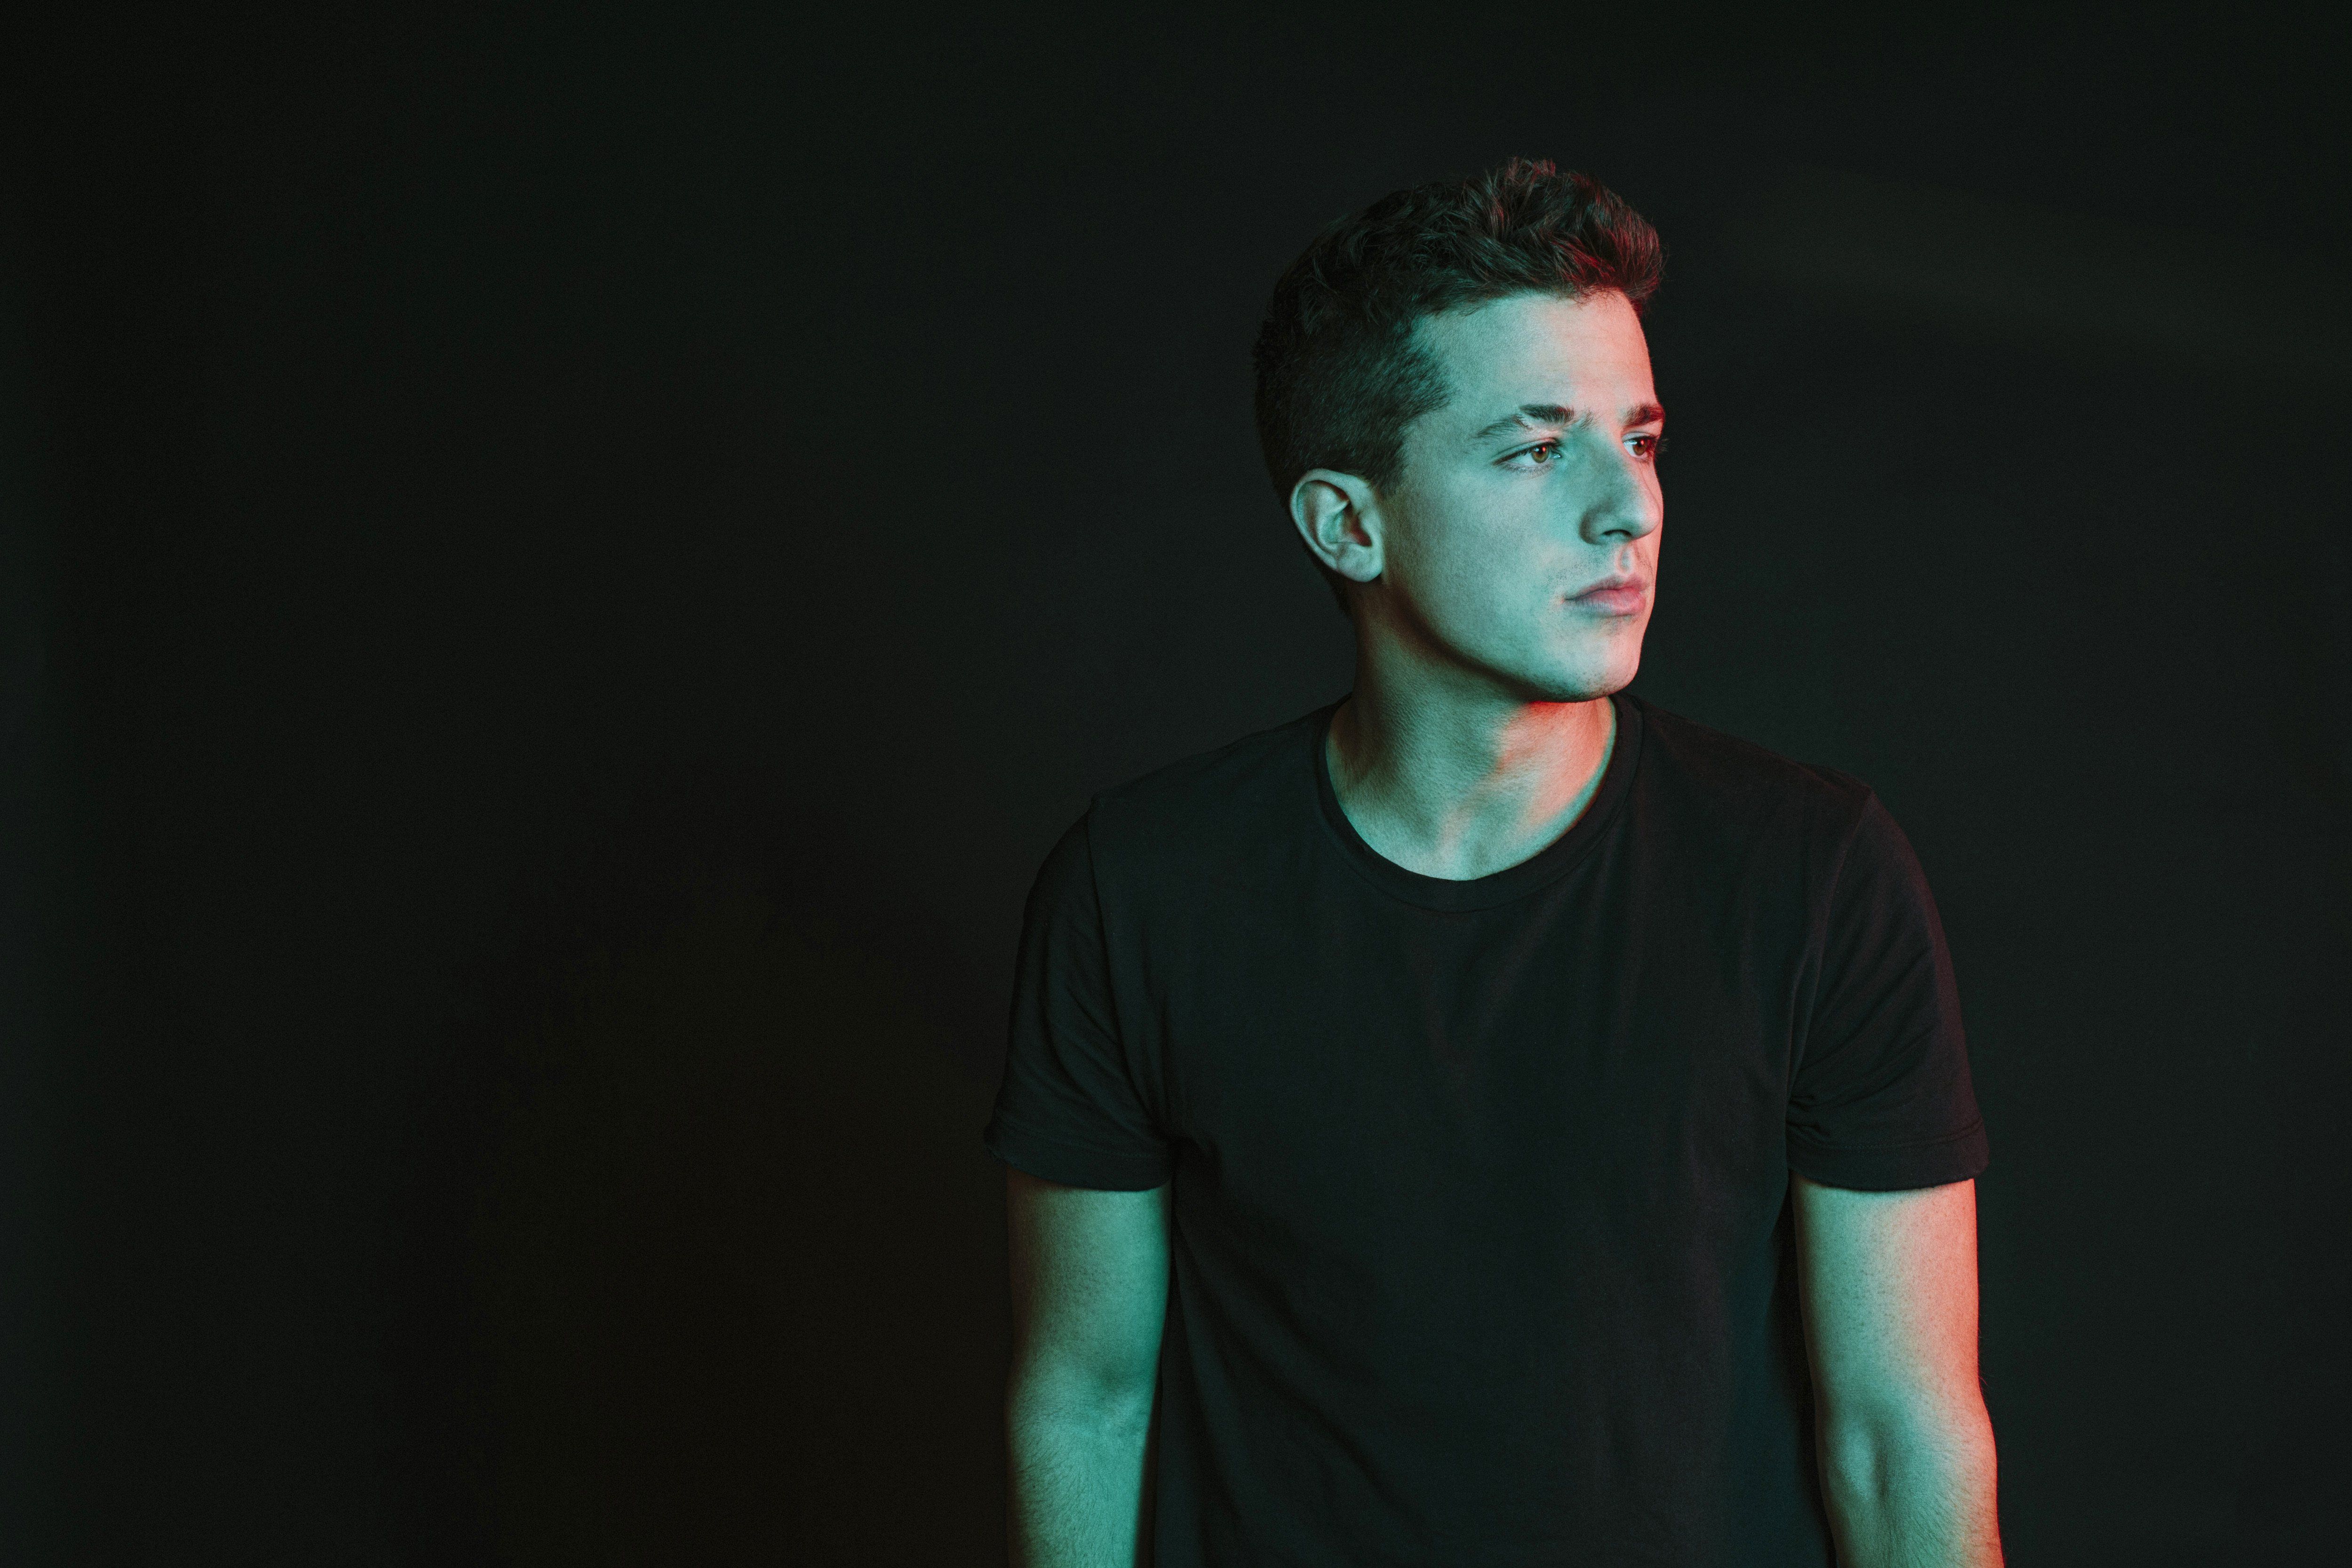 Charlie Puth Wallpapers, Image, Backgrounds, Photos and Pictures.